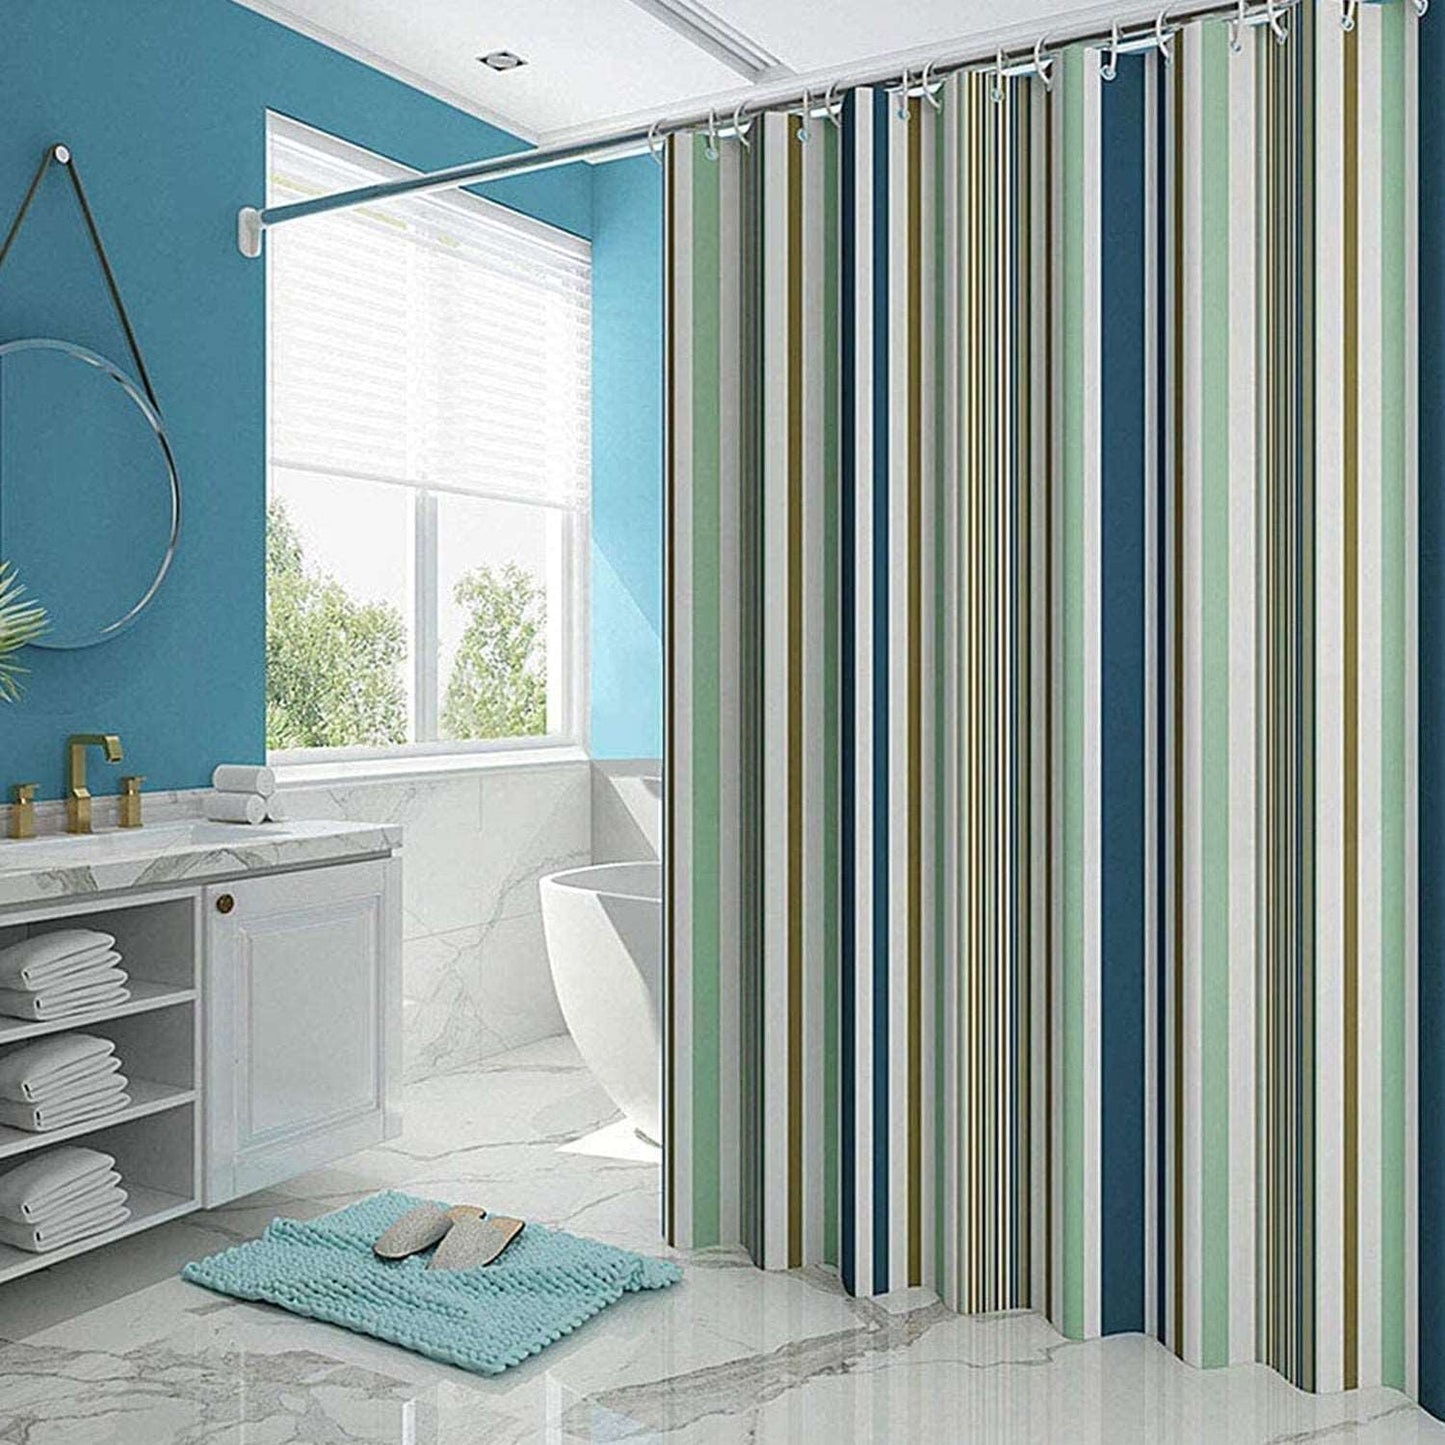 Bright Vertical Stripes in The Shower Curtain